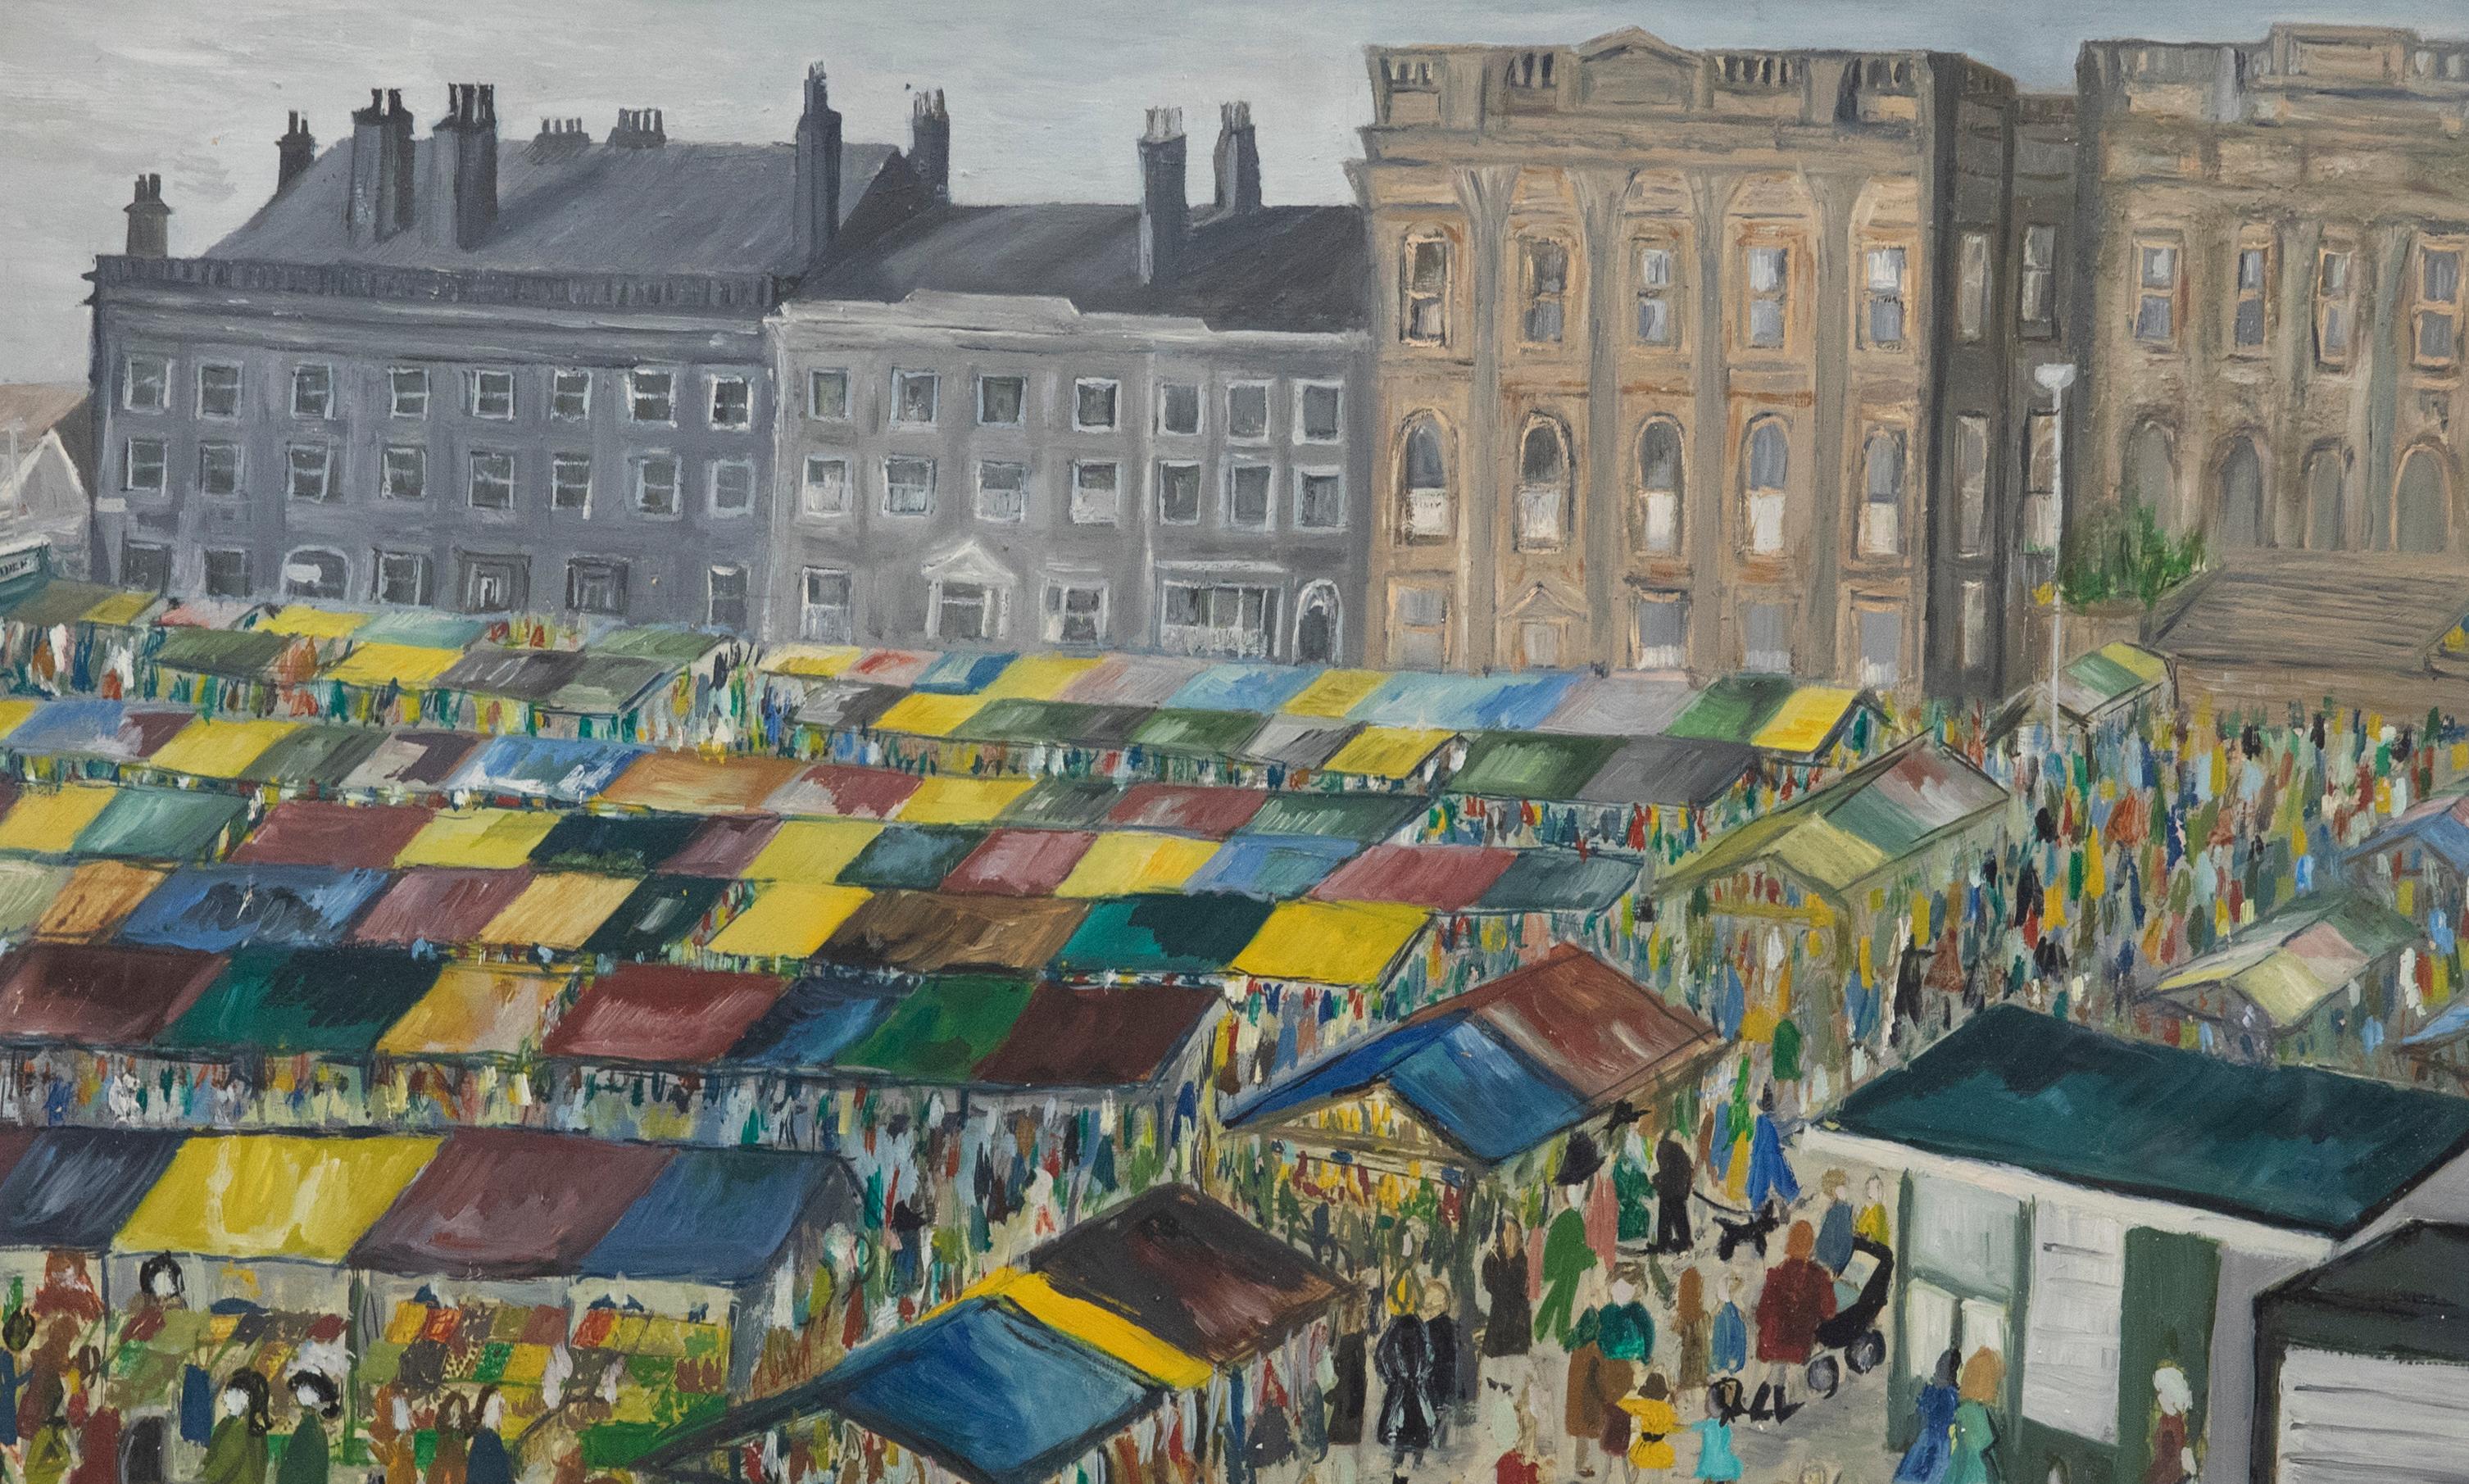 Mid 20th Century Oil - Market Day, Stockport - Painting by Unknown